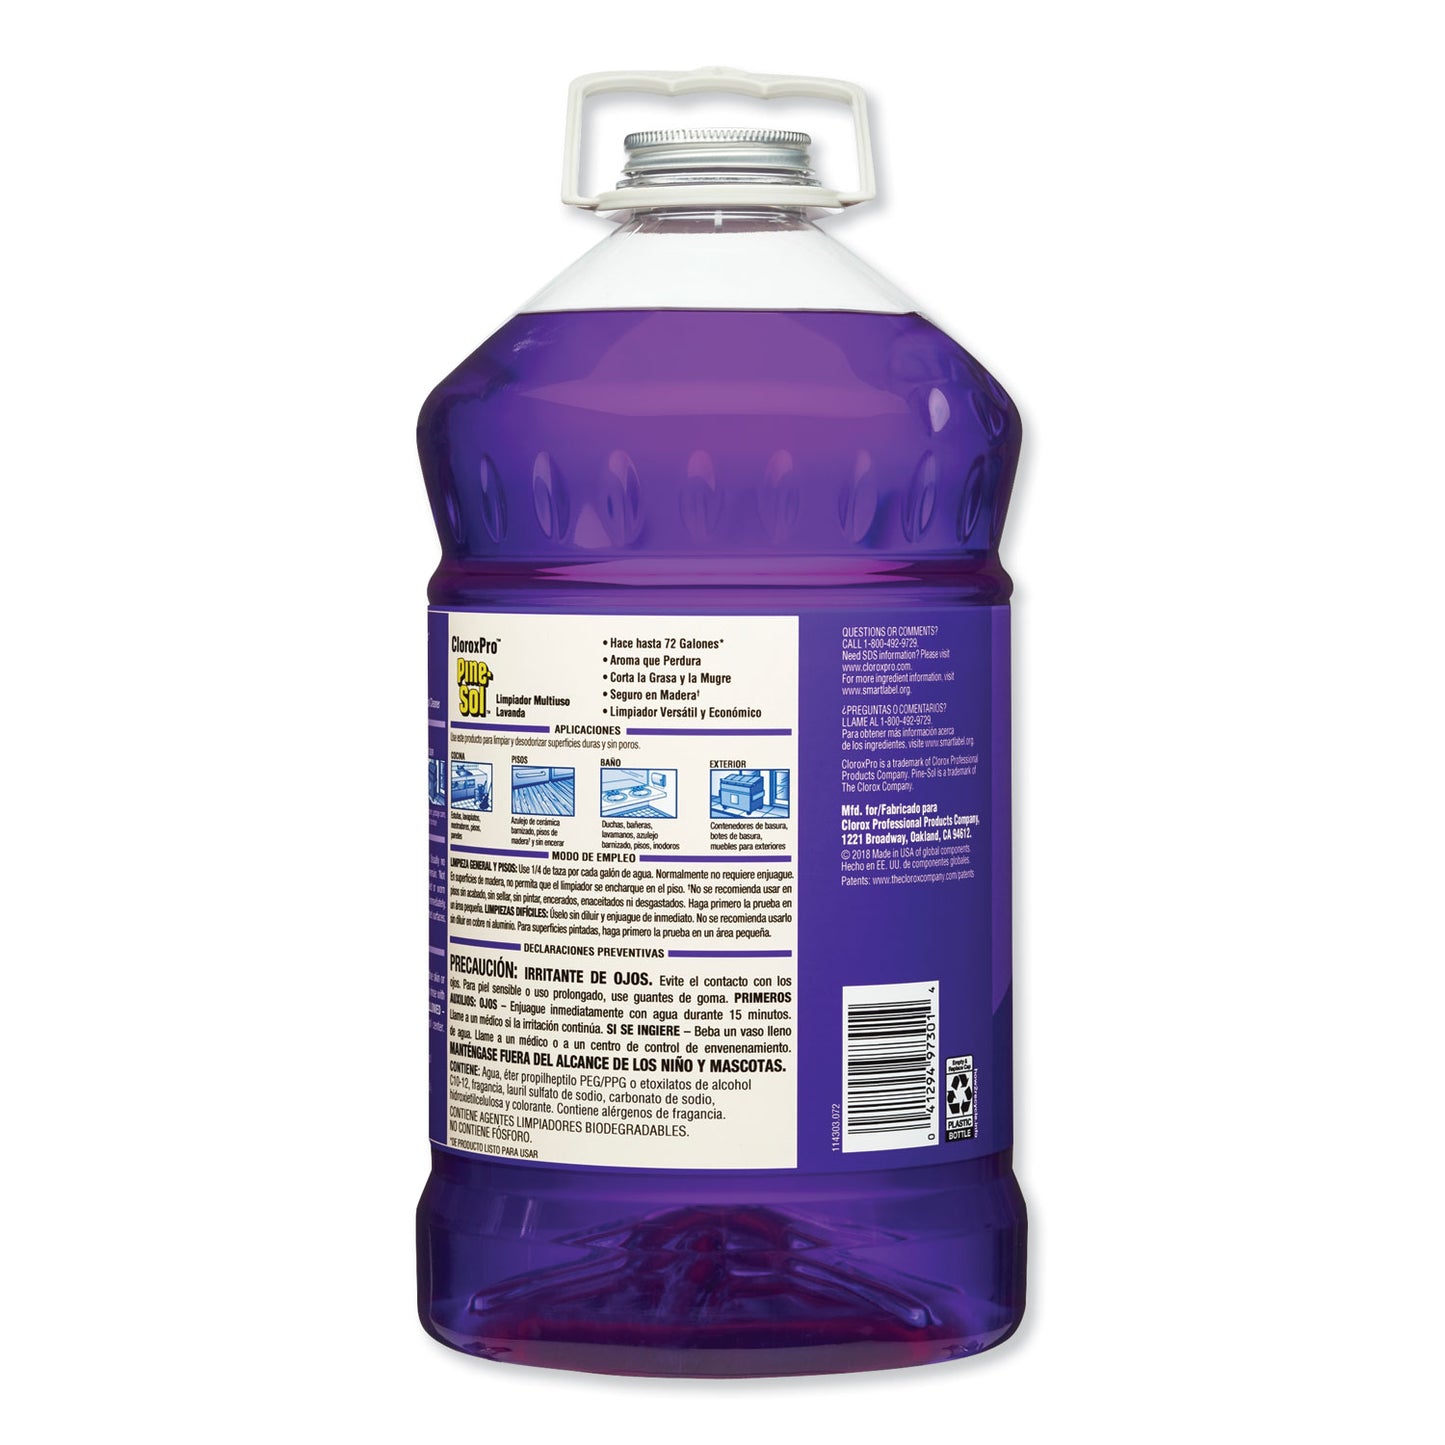 Clorox Pine-Sol All Purpose Cleaner 144 oz. Lavender Clean Scent (Pack of 3)